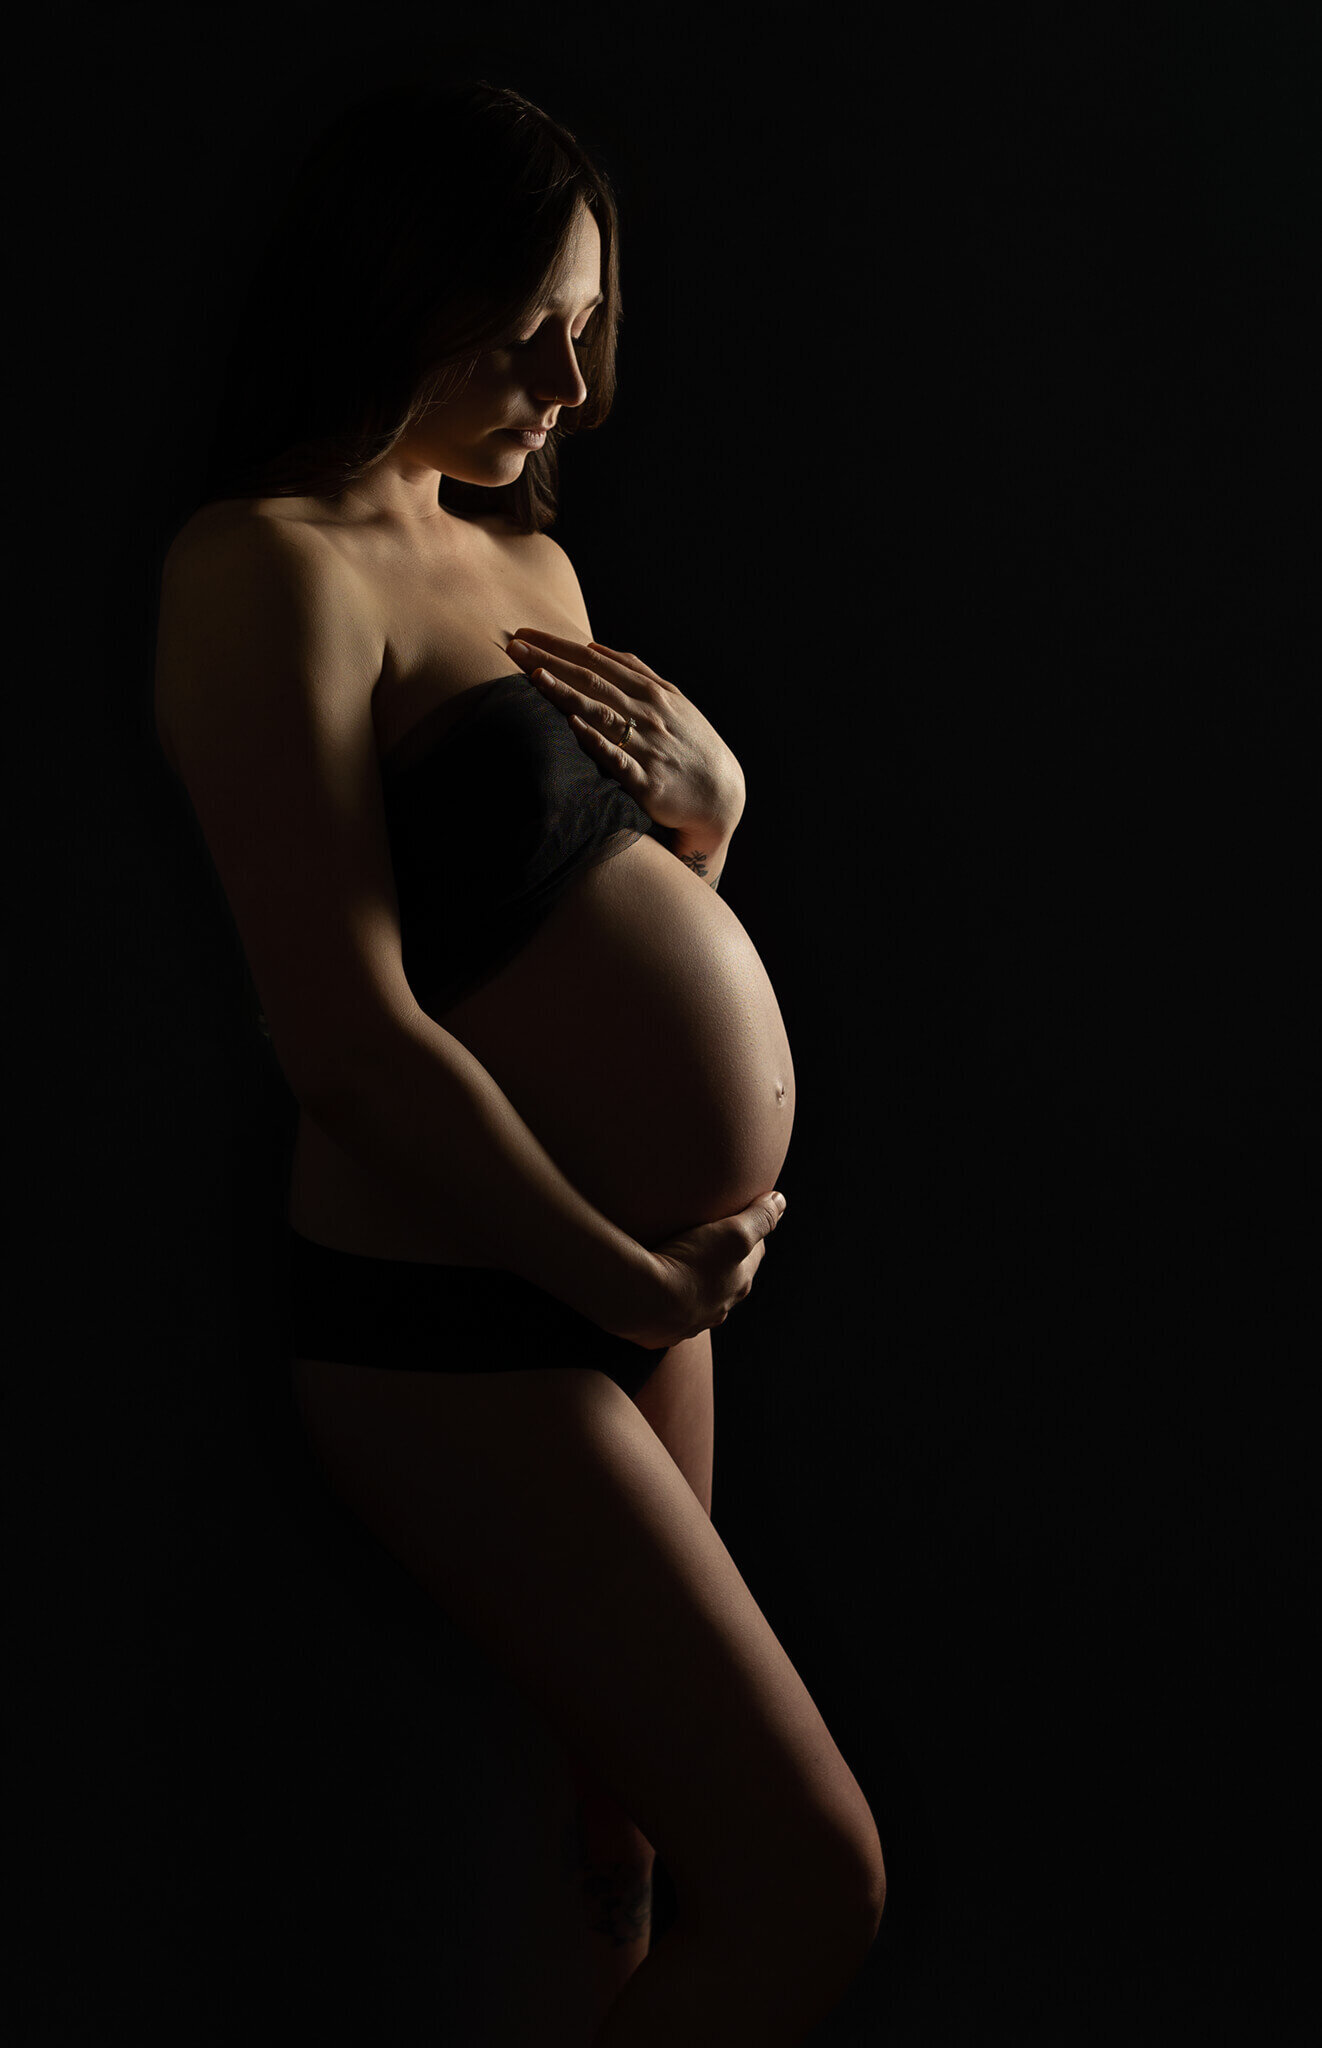 silhouette of a pregnant woman while touching her belly and looking down in a beautiful and artistic way